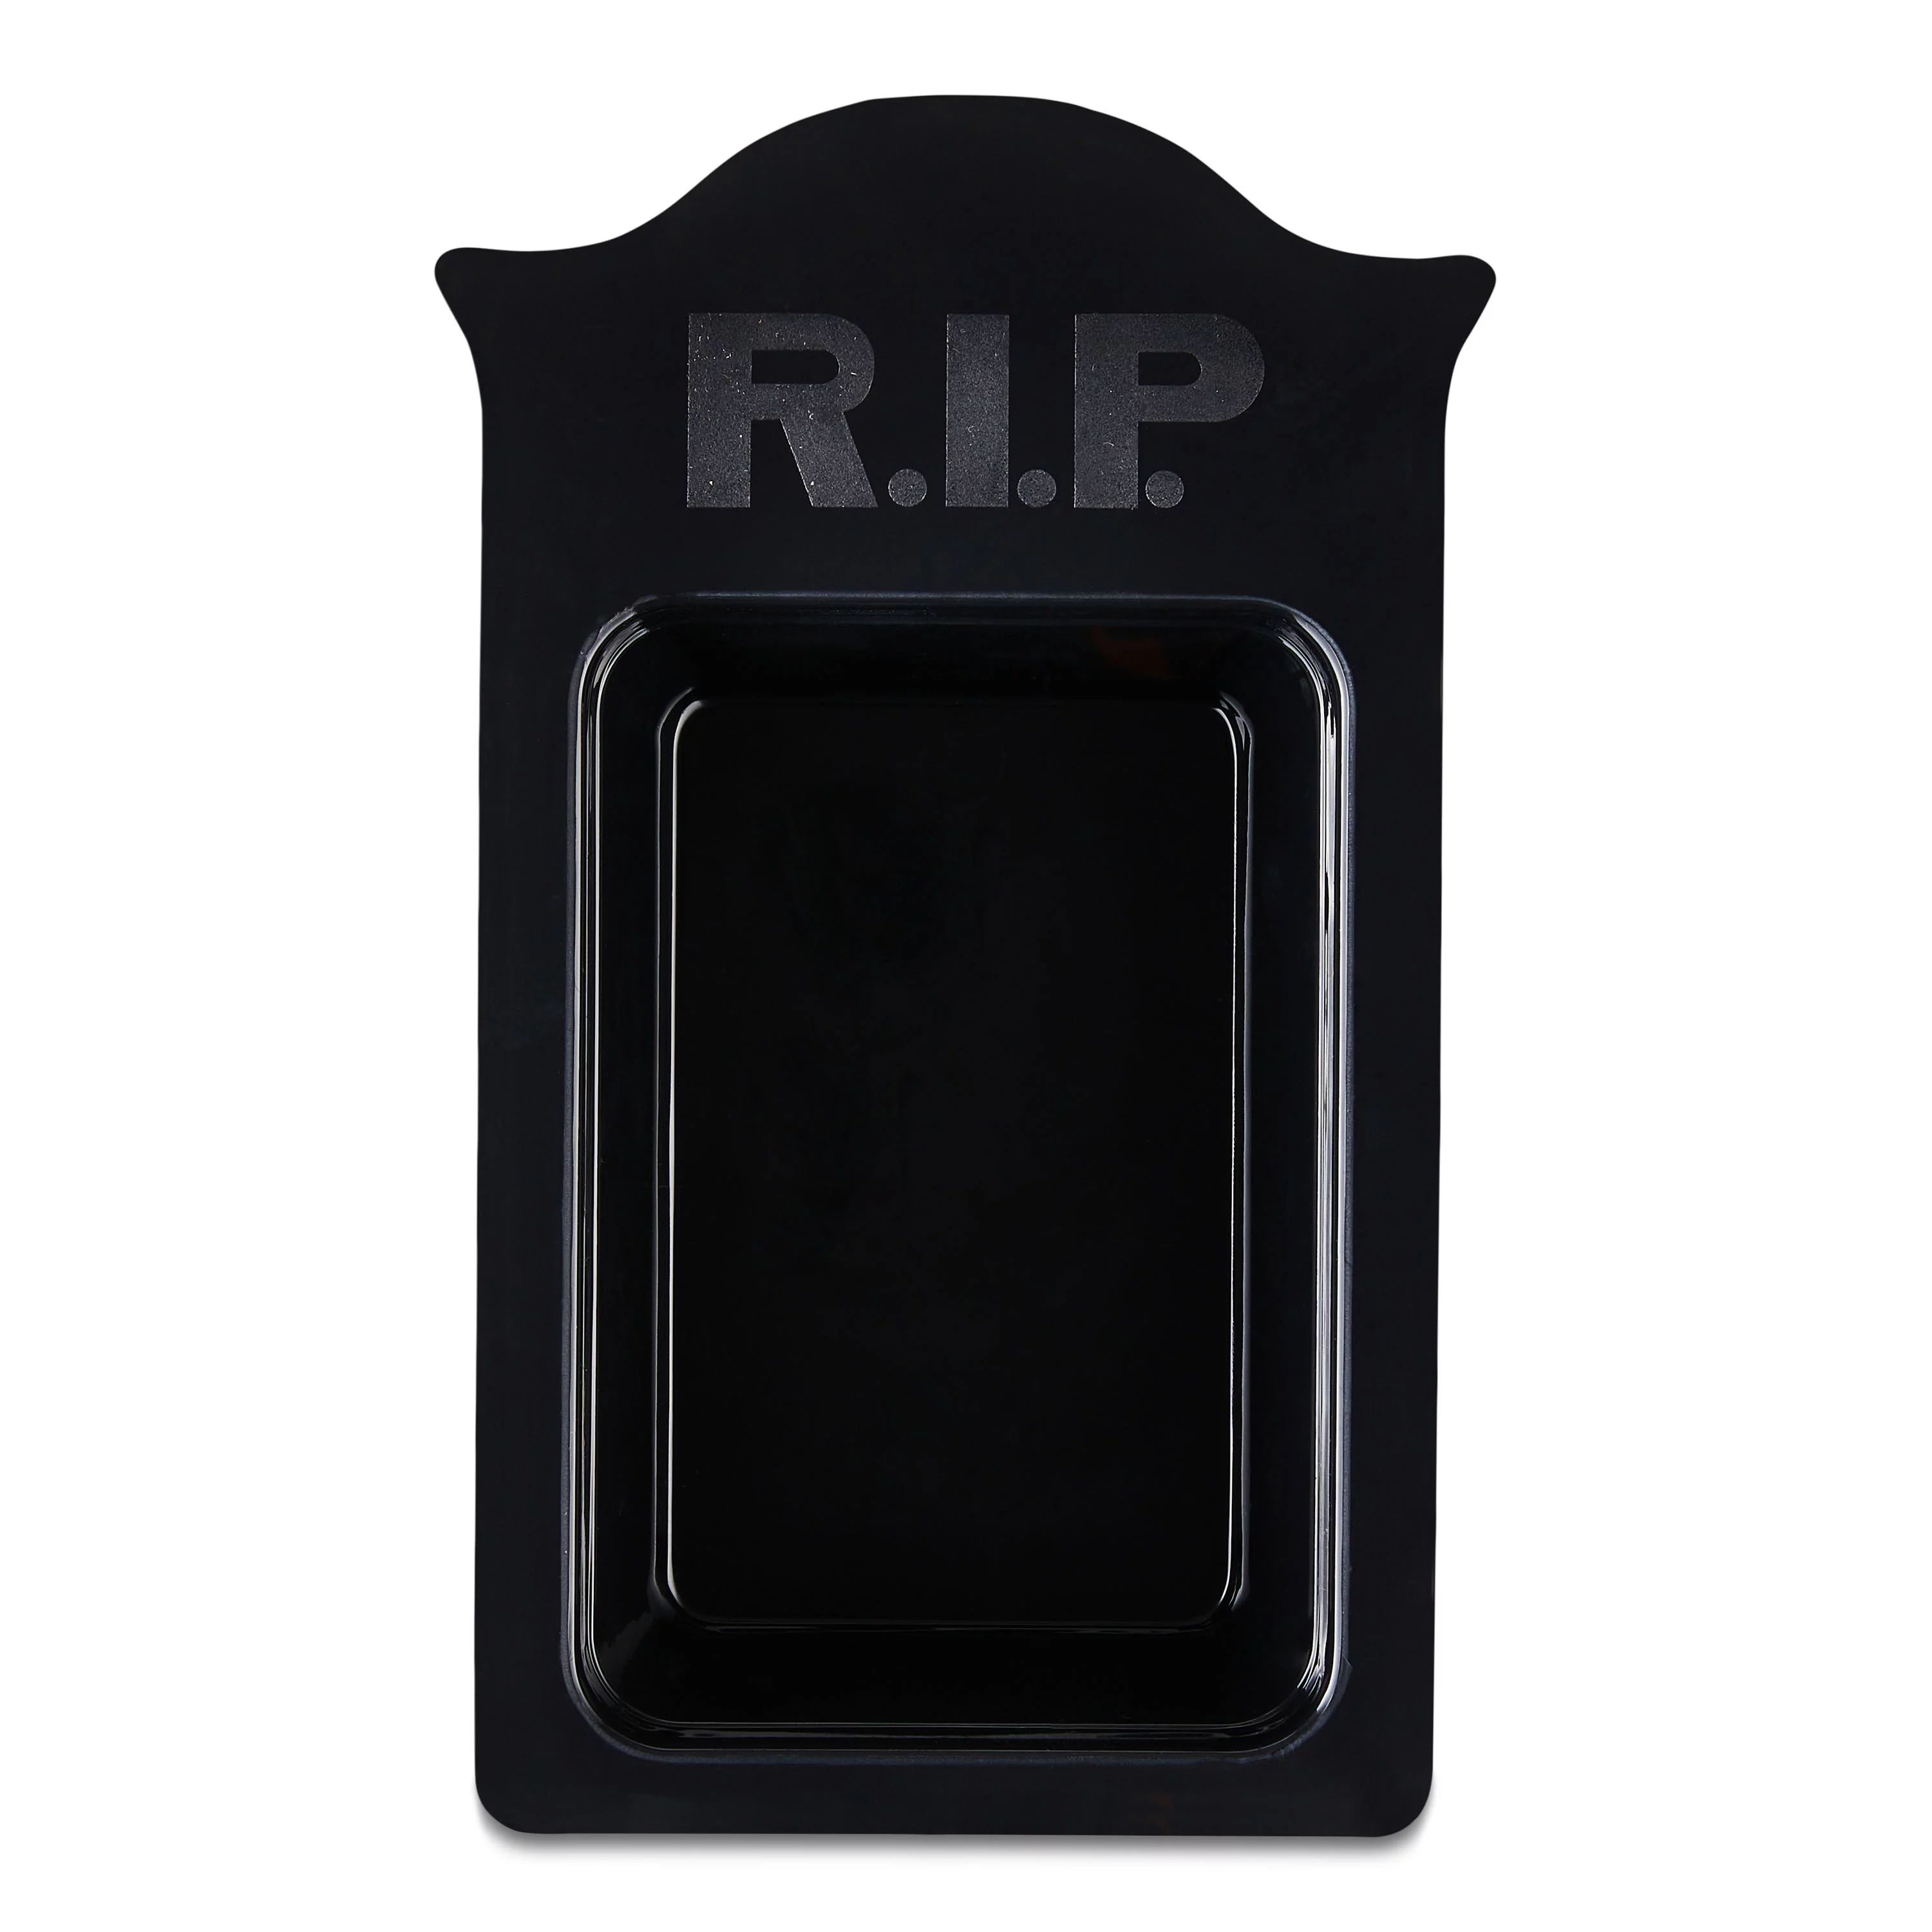 Halloween Plastic RIP Tombstone Shaped Bowl, Black, by Way to Celebrate | Walmart (US)